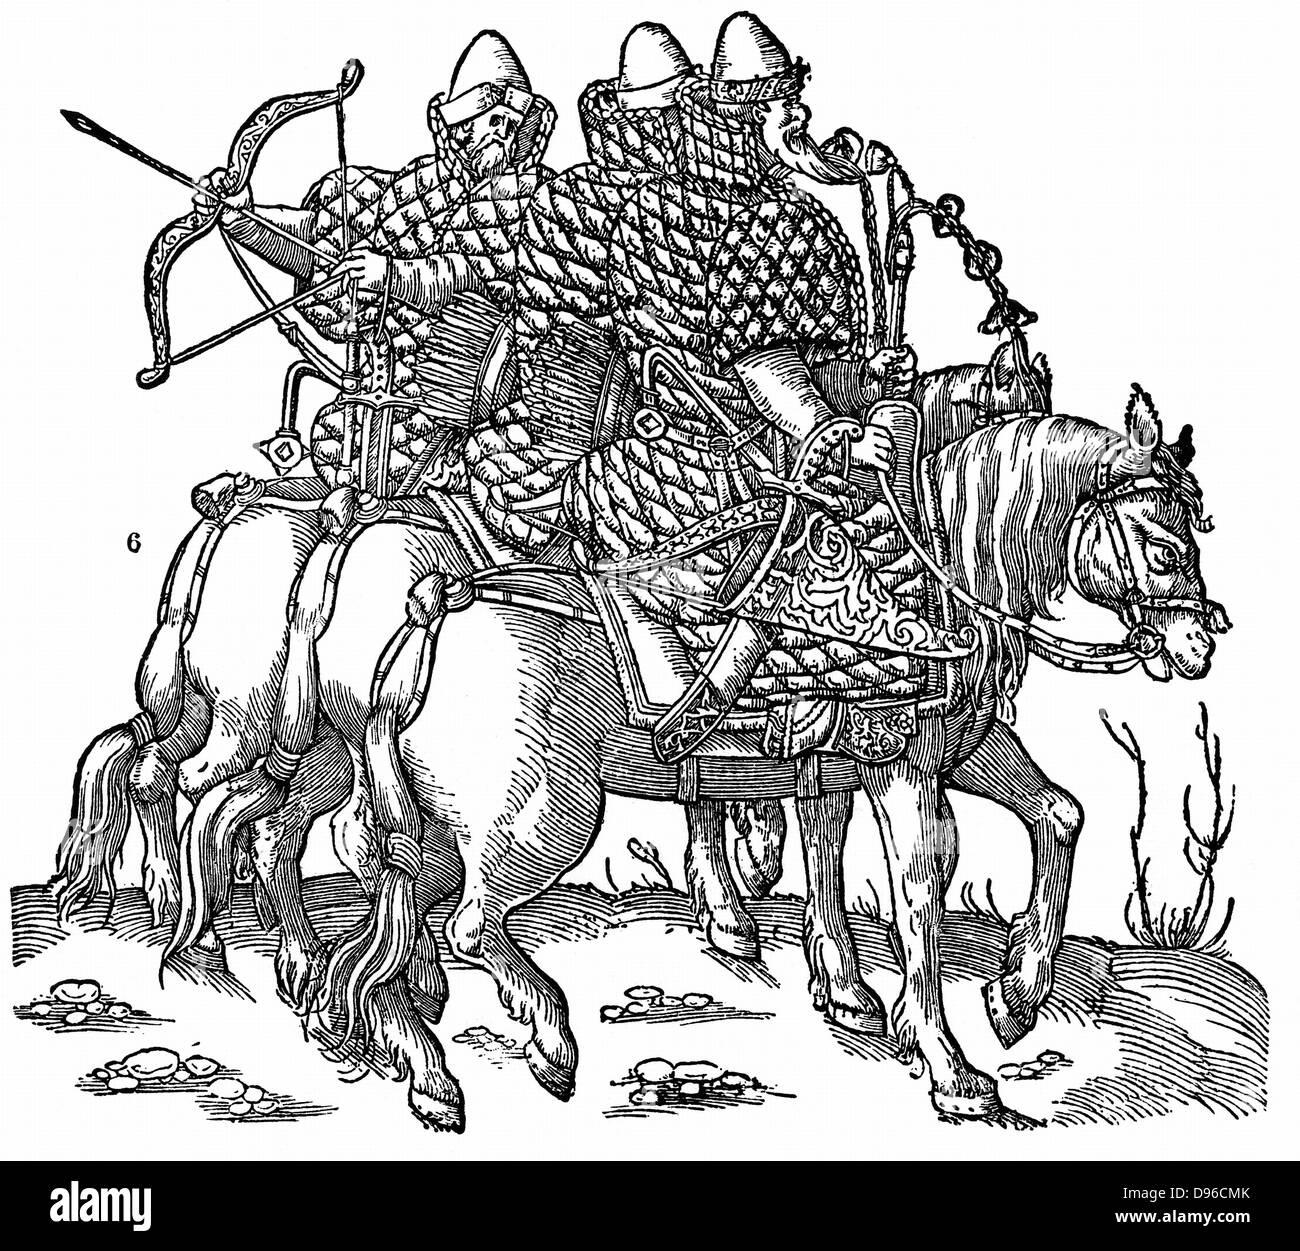 Mounted Muscovite warriors equipped with bows and arrow, swords and quilted armour. Woodcut 1556. Stock Photo